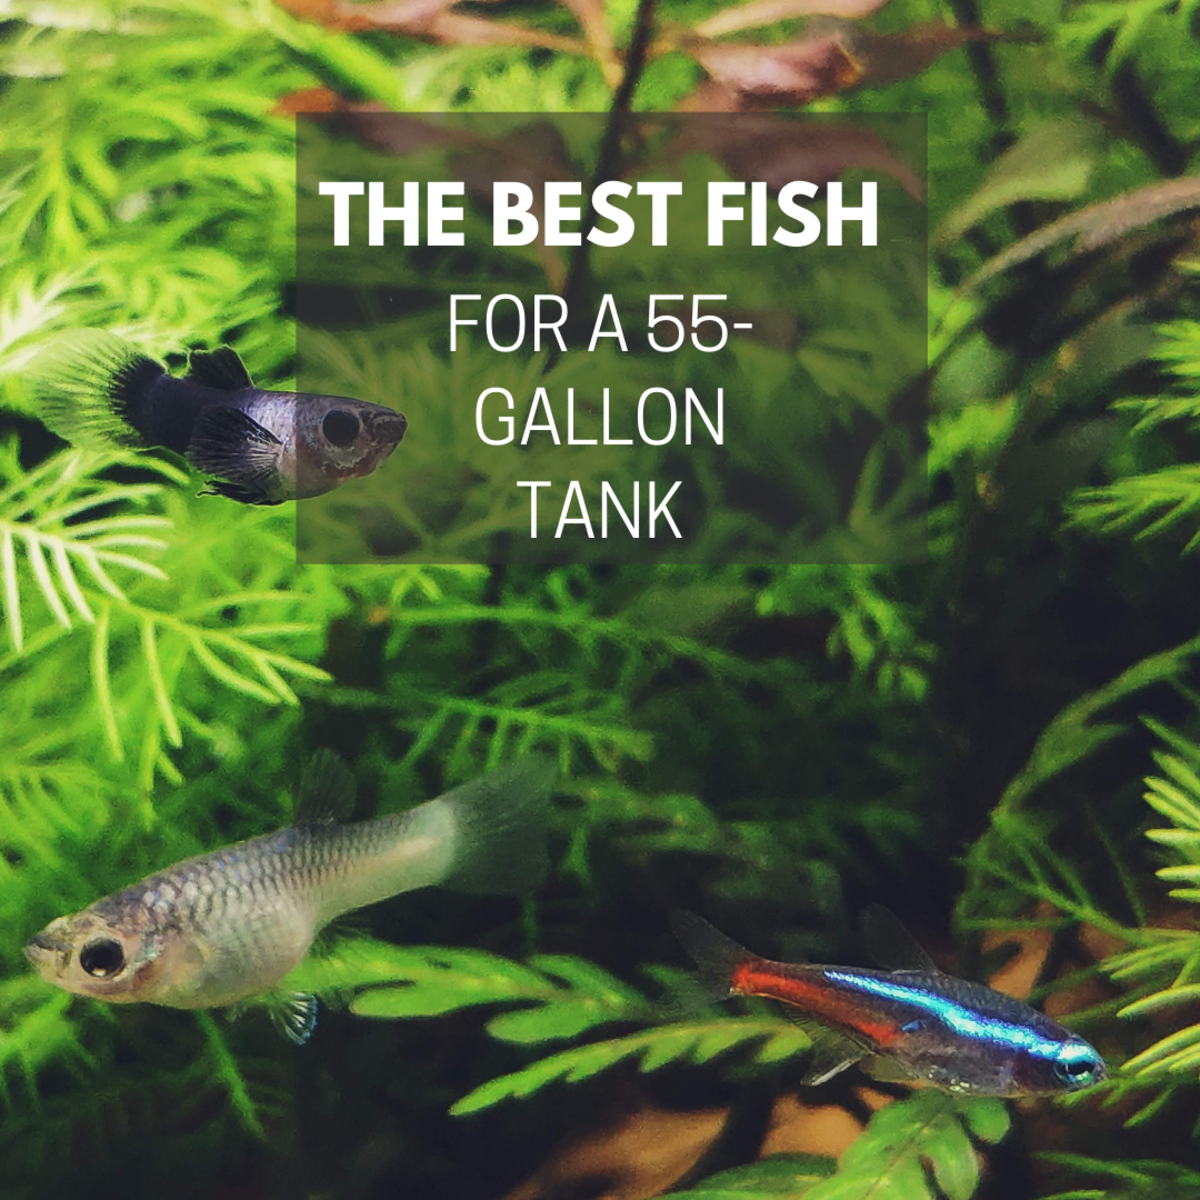 20 Best Fish for a 55-Gallon Tank - PetHelpful